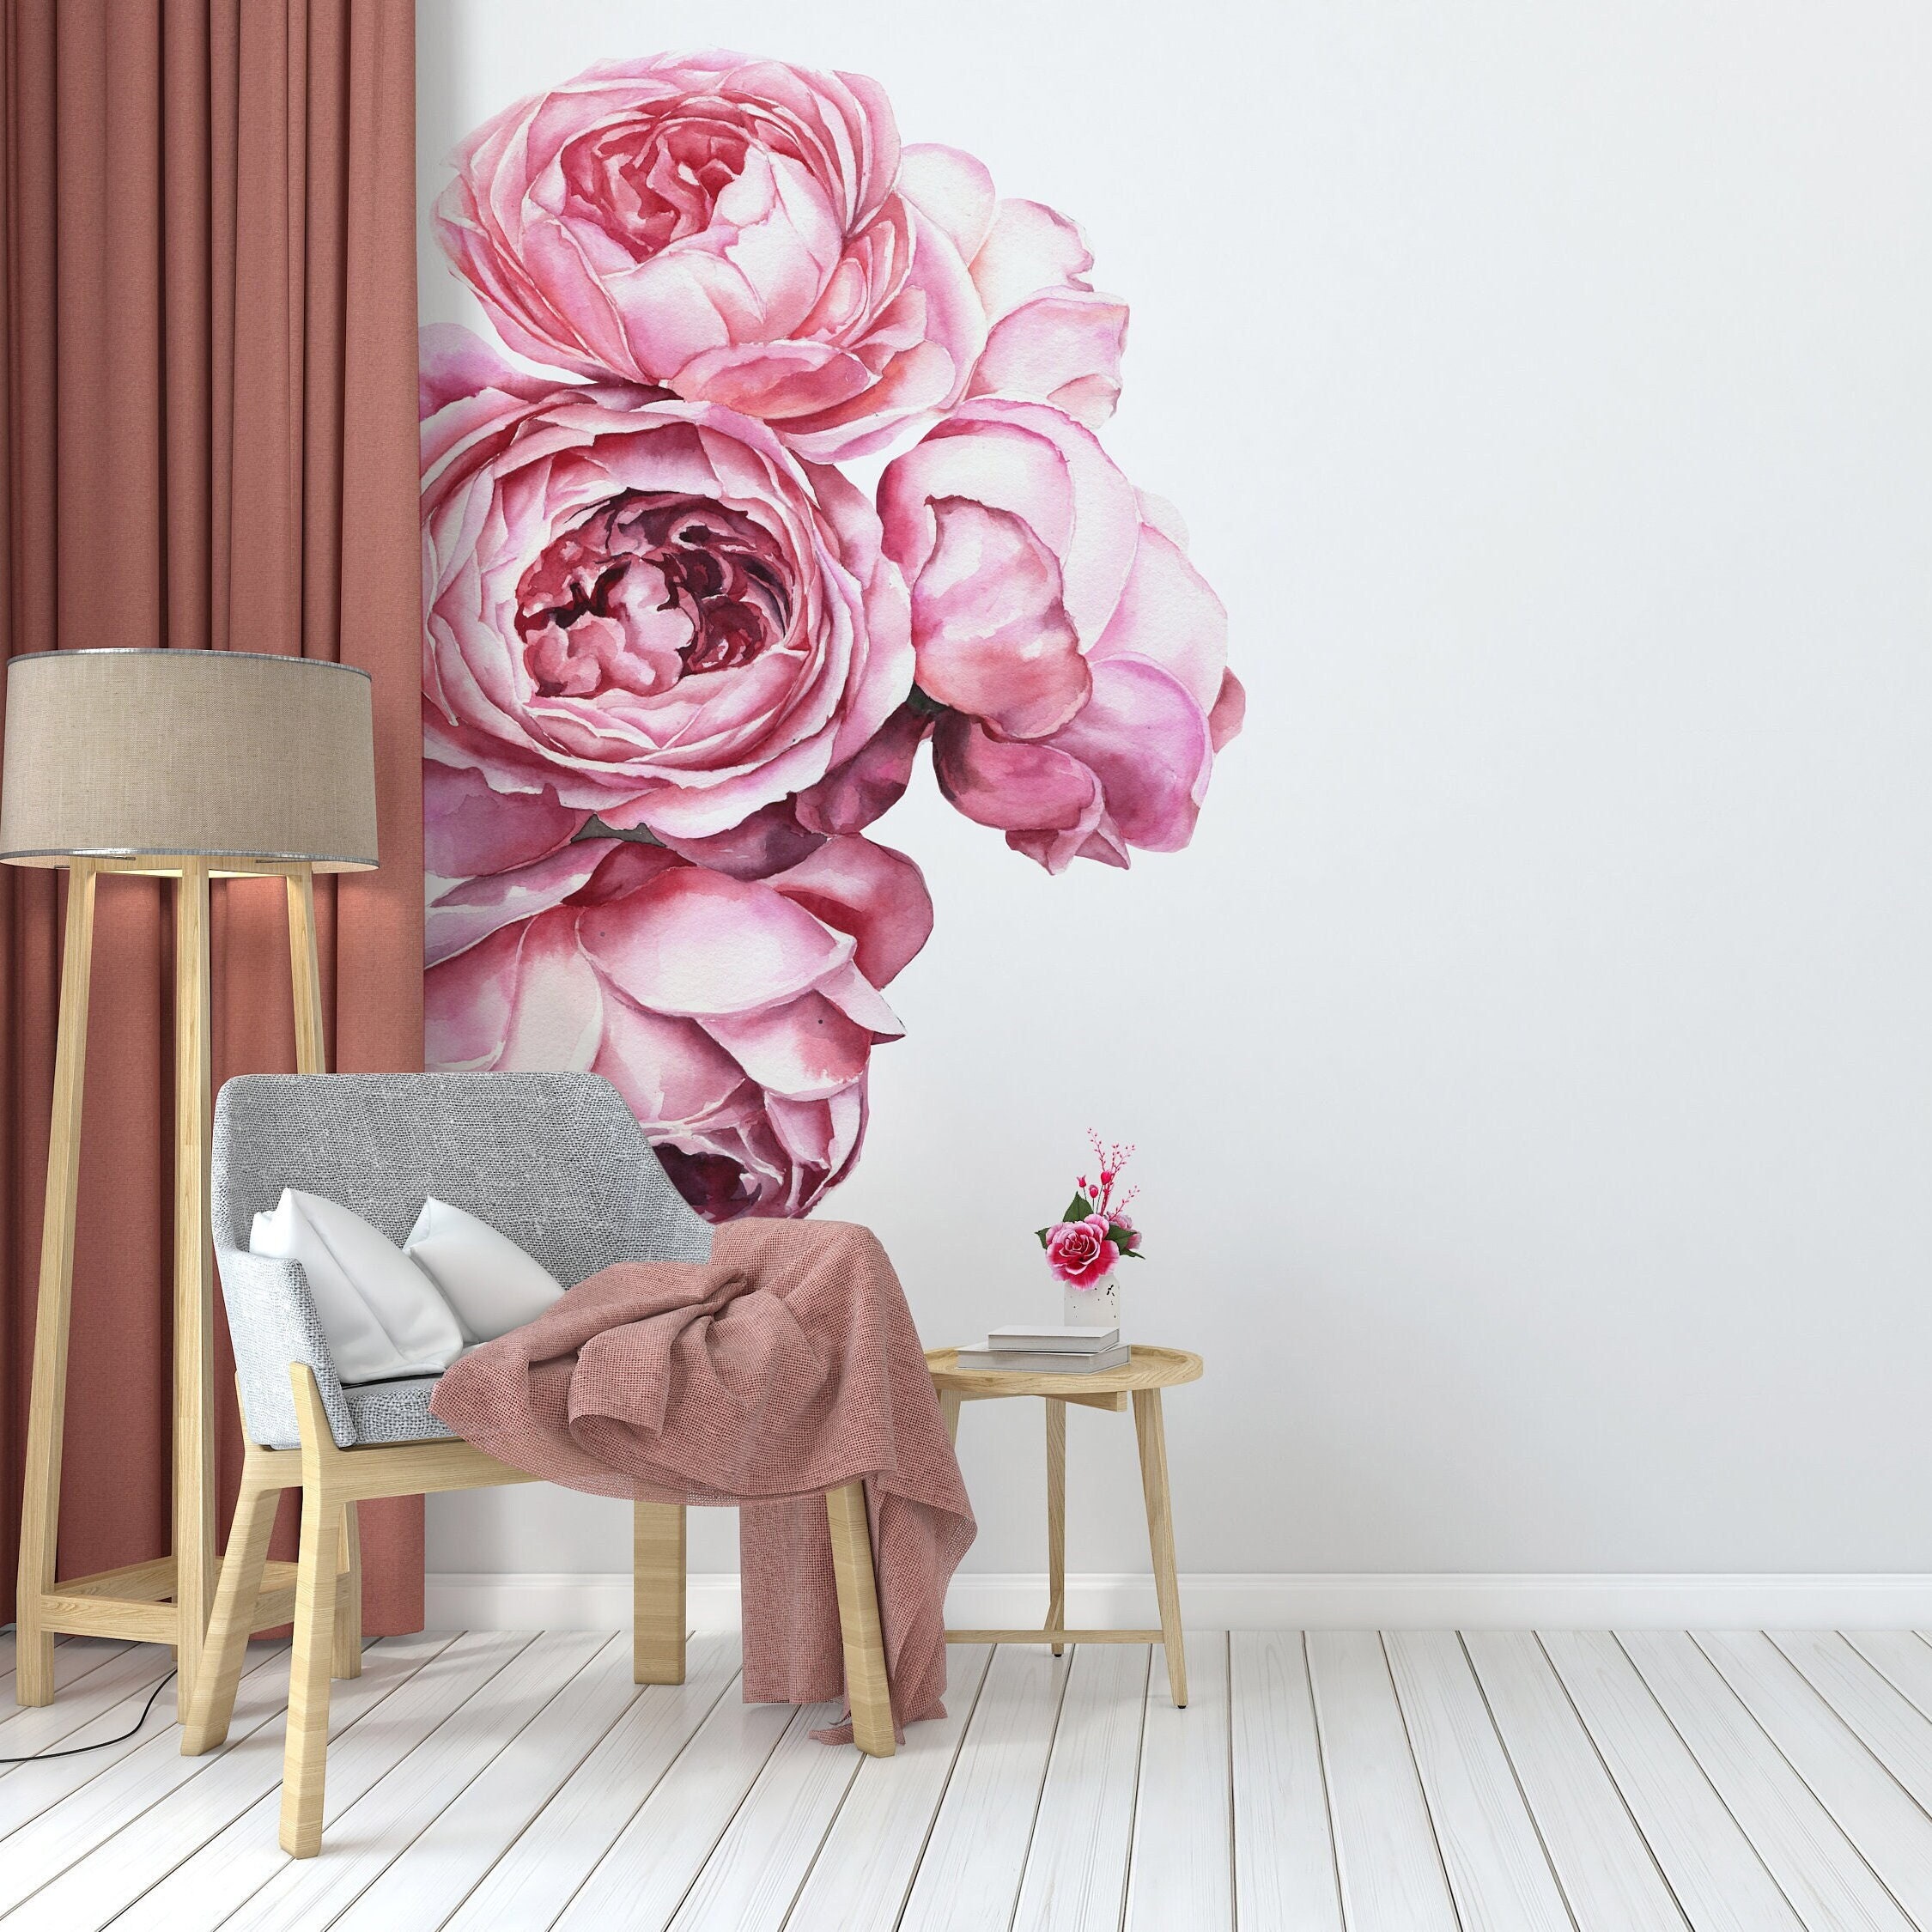 Nature Inspired Vibrant Floral Printed Wall Stickers / Decals for